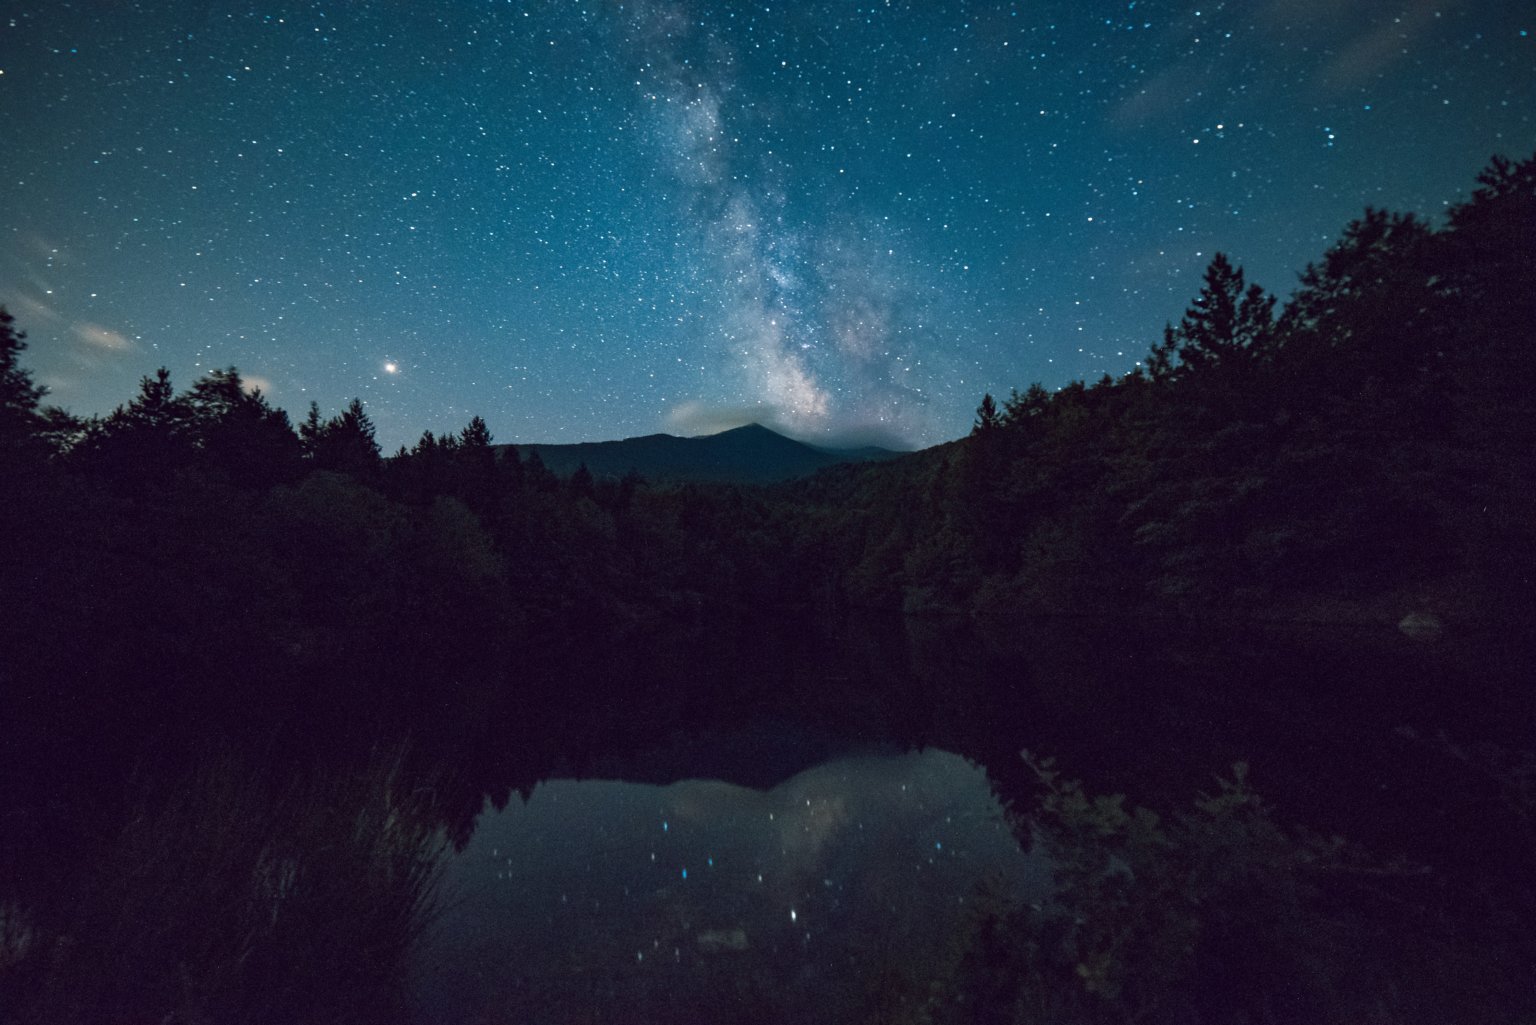 Google Pixel Smartphones Will Get Time Lapse Astrophotography